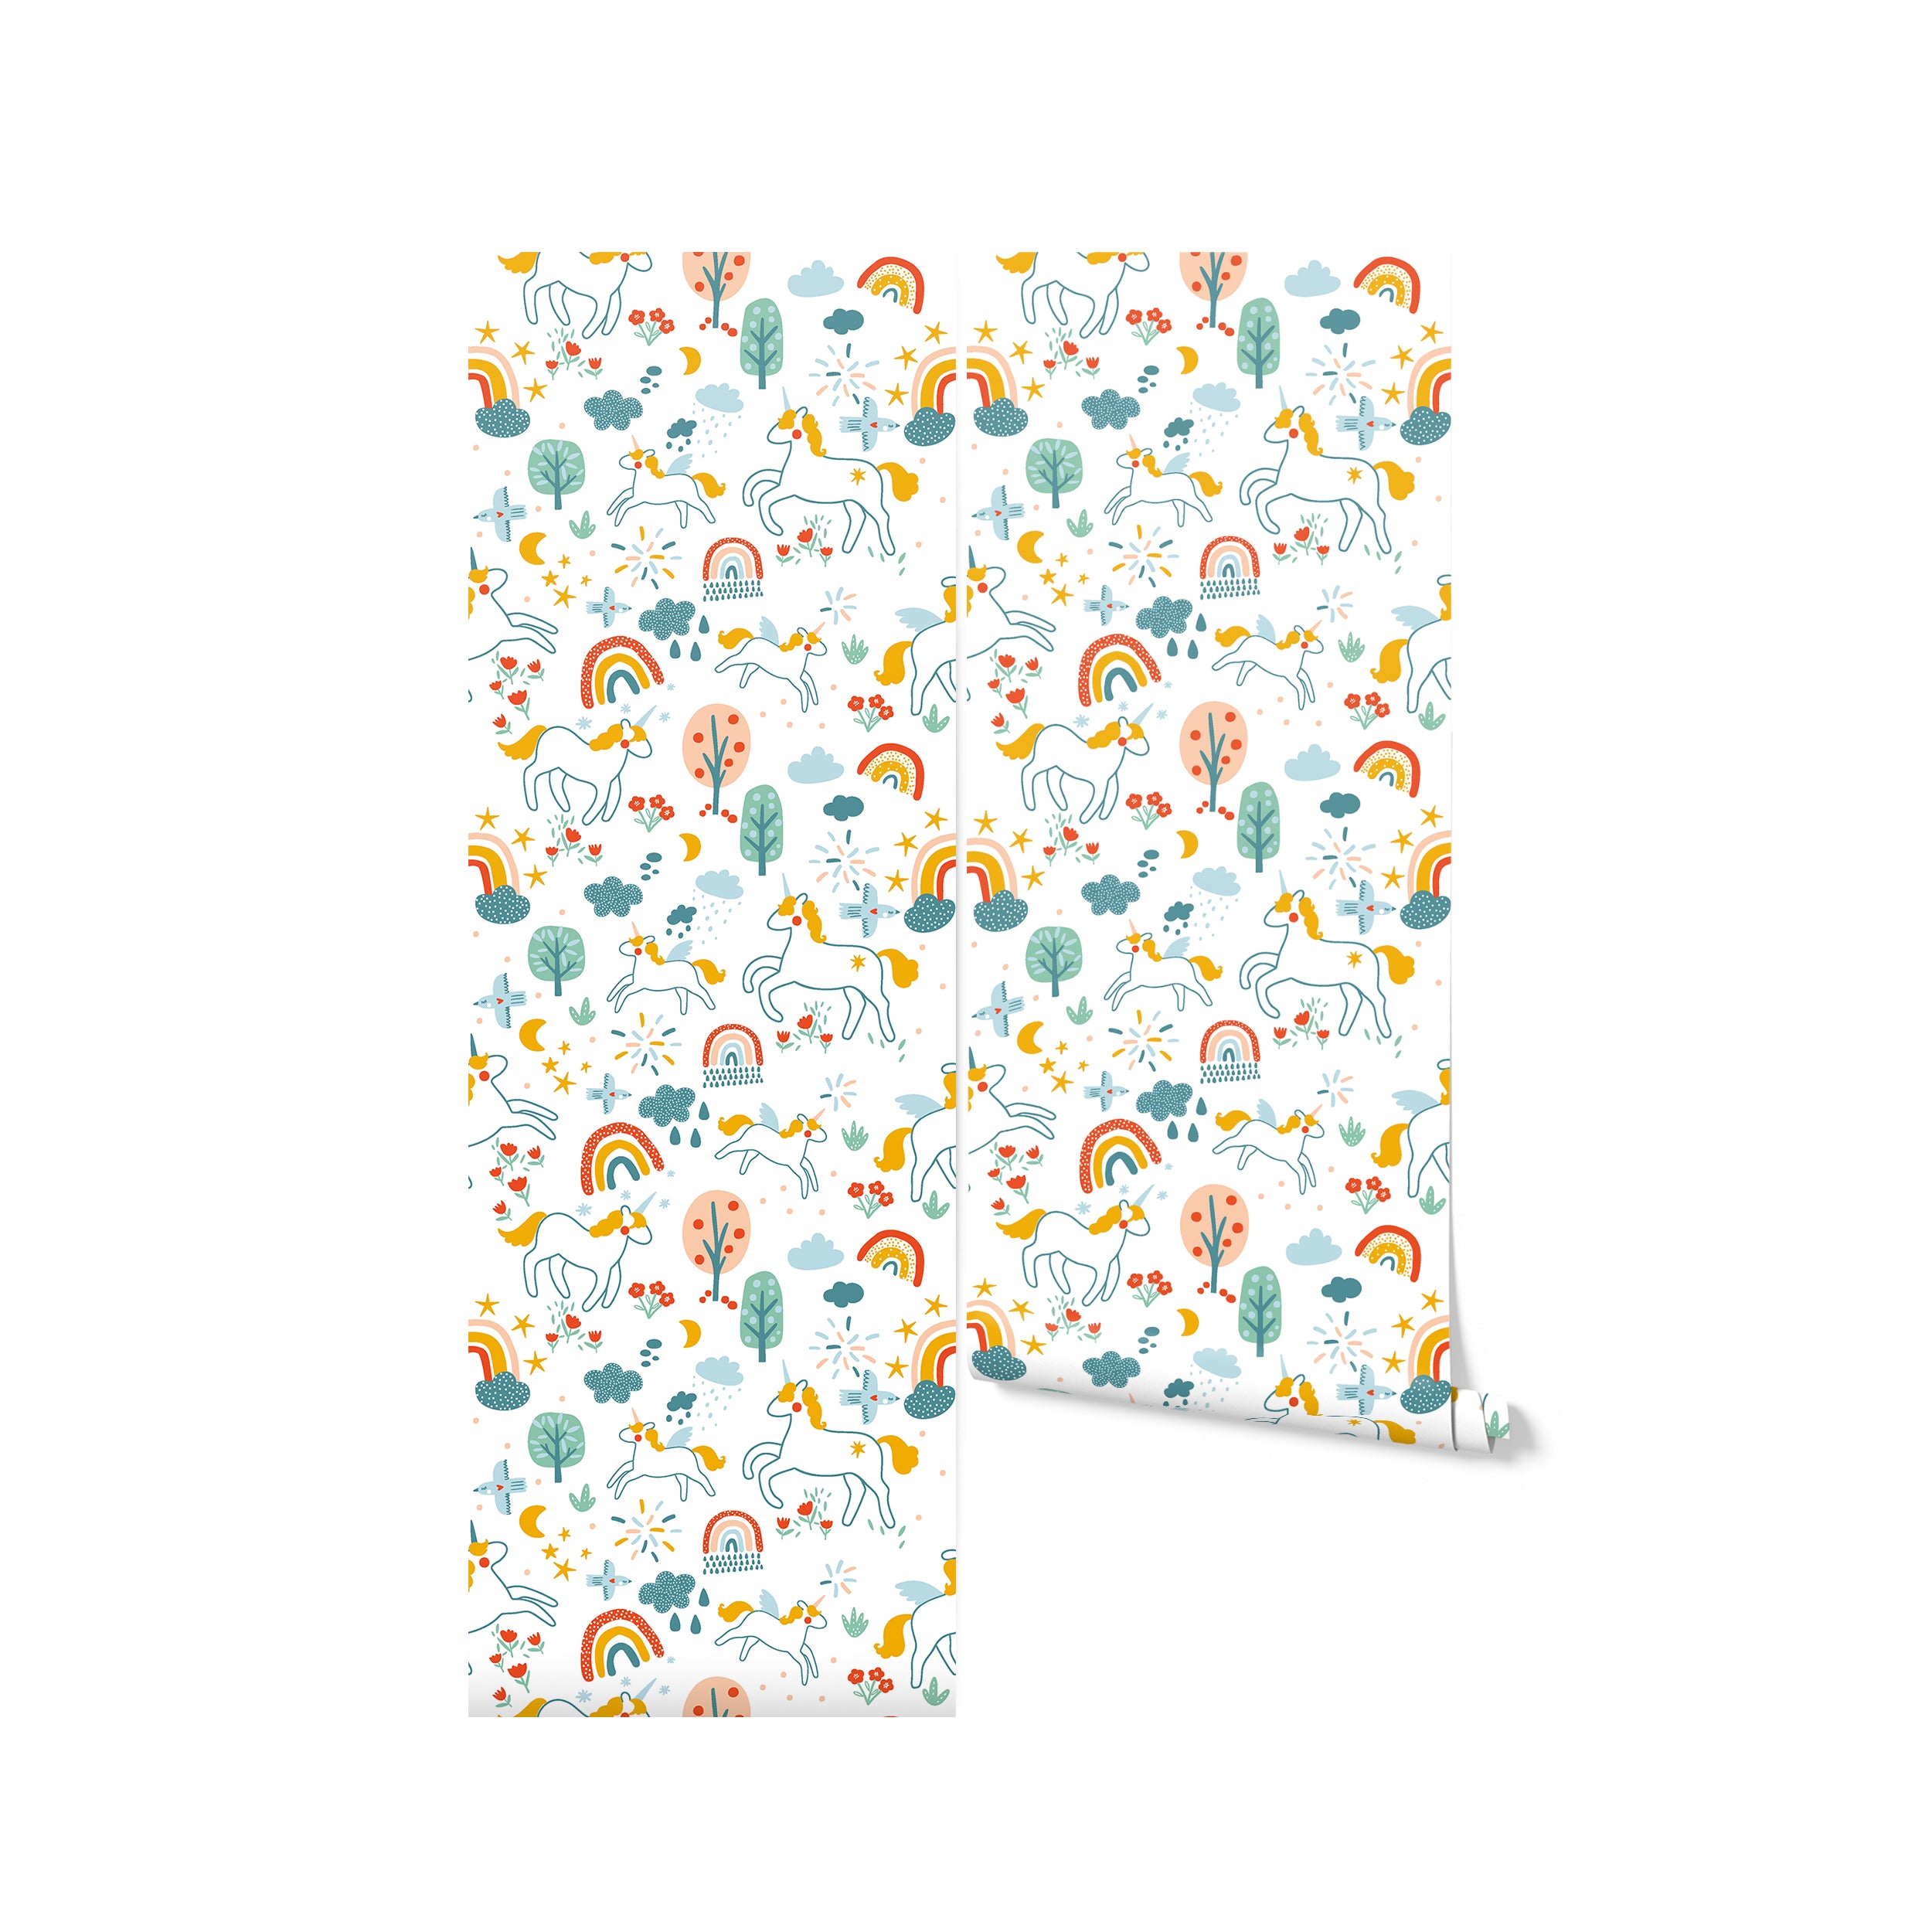 Roll of children’s wallpaper displaying a colorful and enchanting pattern of unicorns, rainbows, and various nature elements, ideal for adding a touch of whimsy to nursery interiors